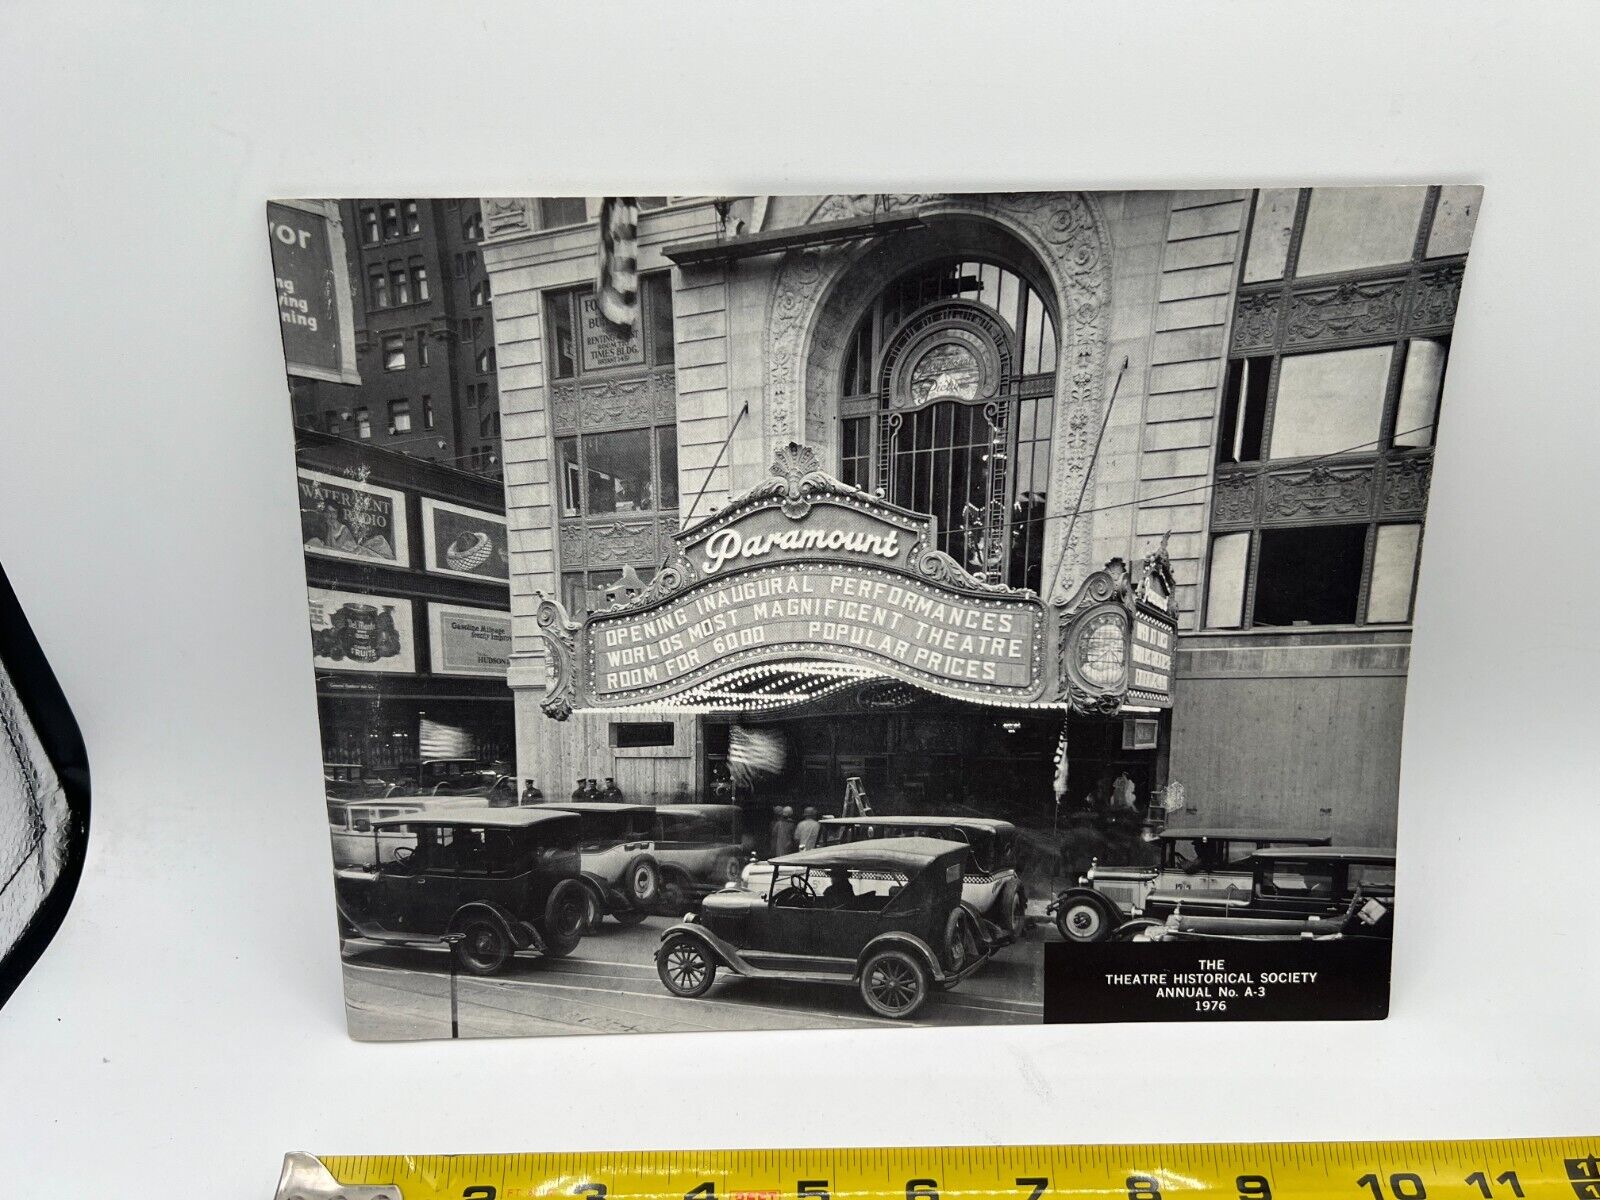 The Theatre Historical Society Annual No. A-3 1976 - Times Square Paramount